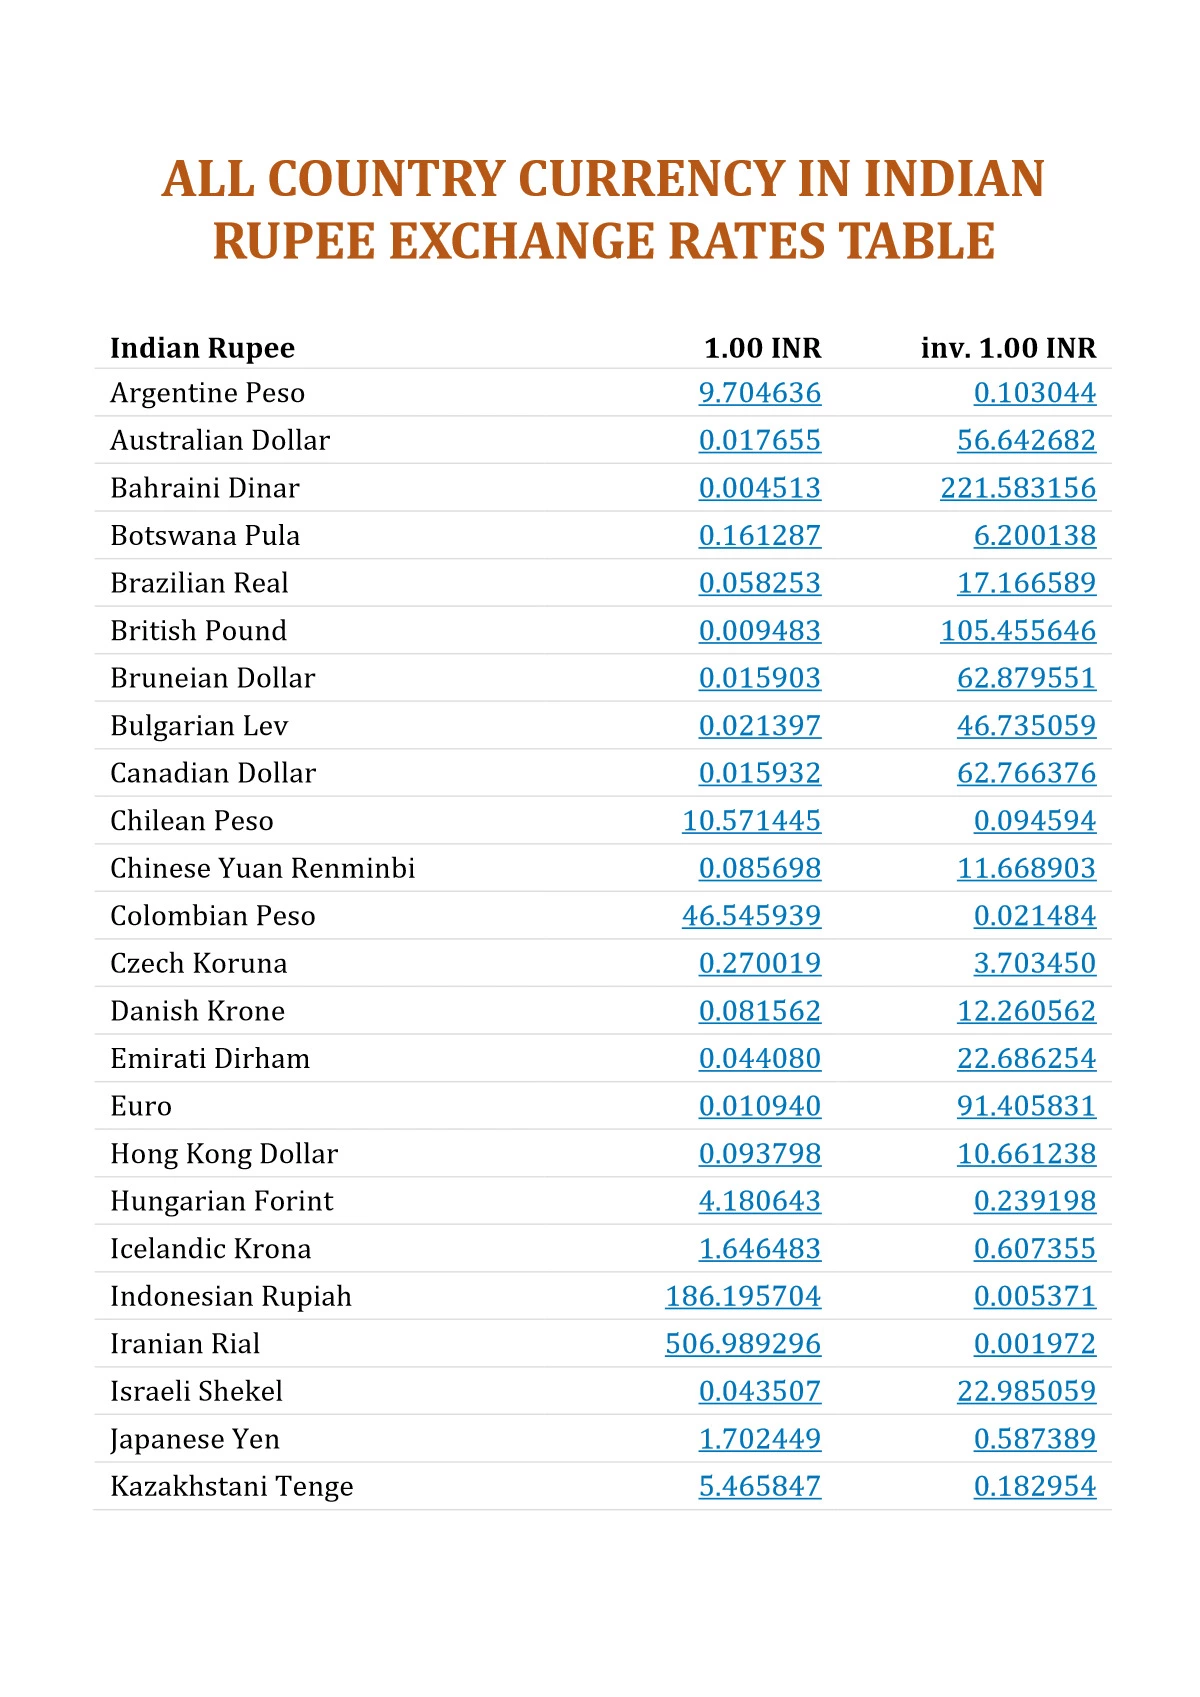 All Country Currency Rate in Indian Rupees